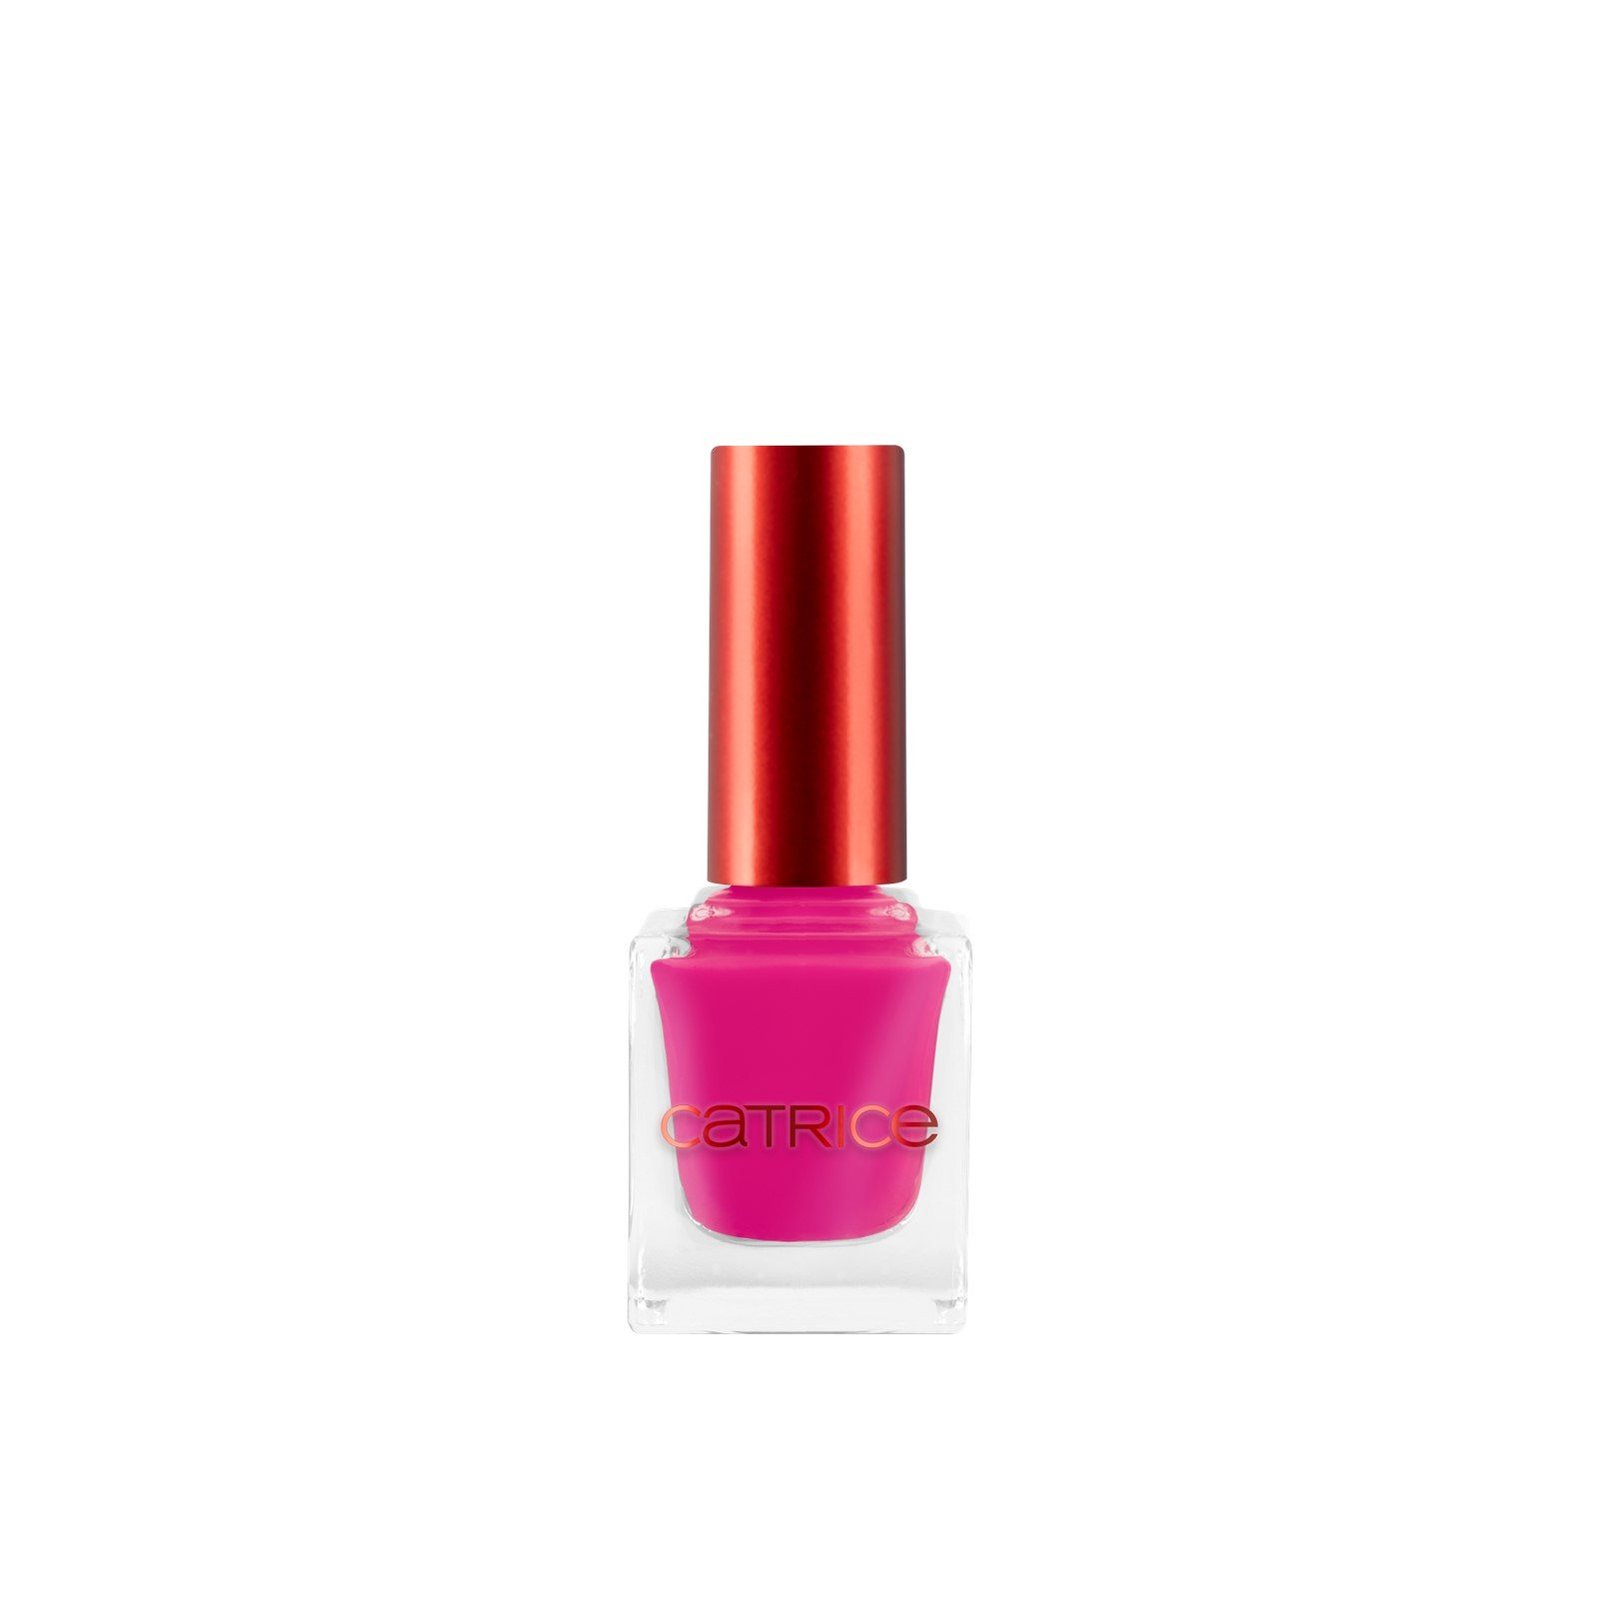 Catrice Heart Affair Nail Lacquer 01 No One's Lover 10.5ml (0.35floz)